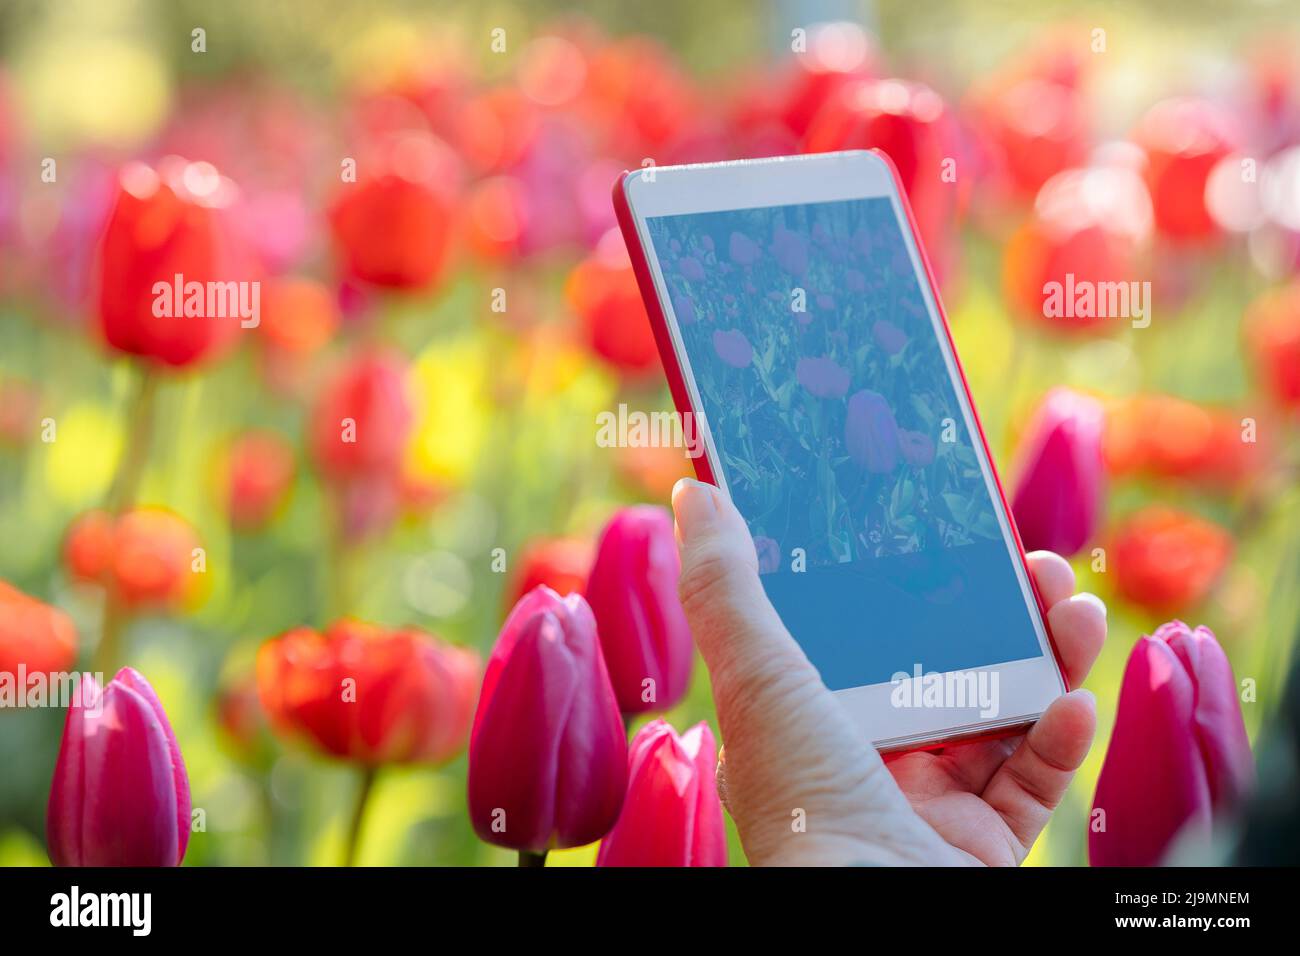 Woman's hand with phone photographing red tulips in park. Field of blooming colorful flowers. Spring landscape. High quality photo Stock Photo